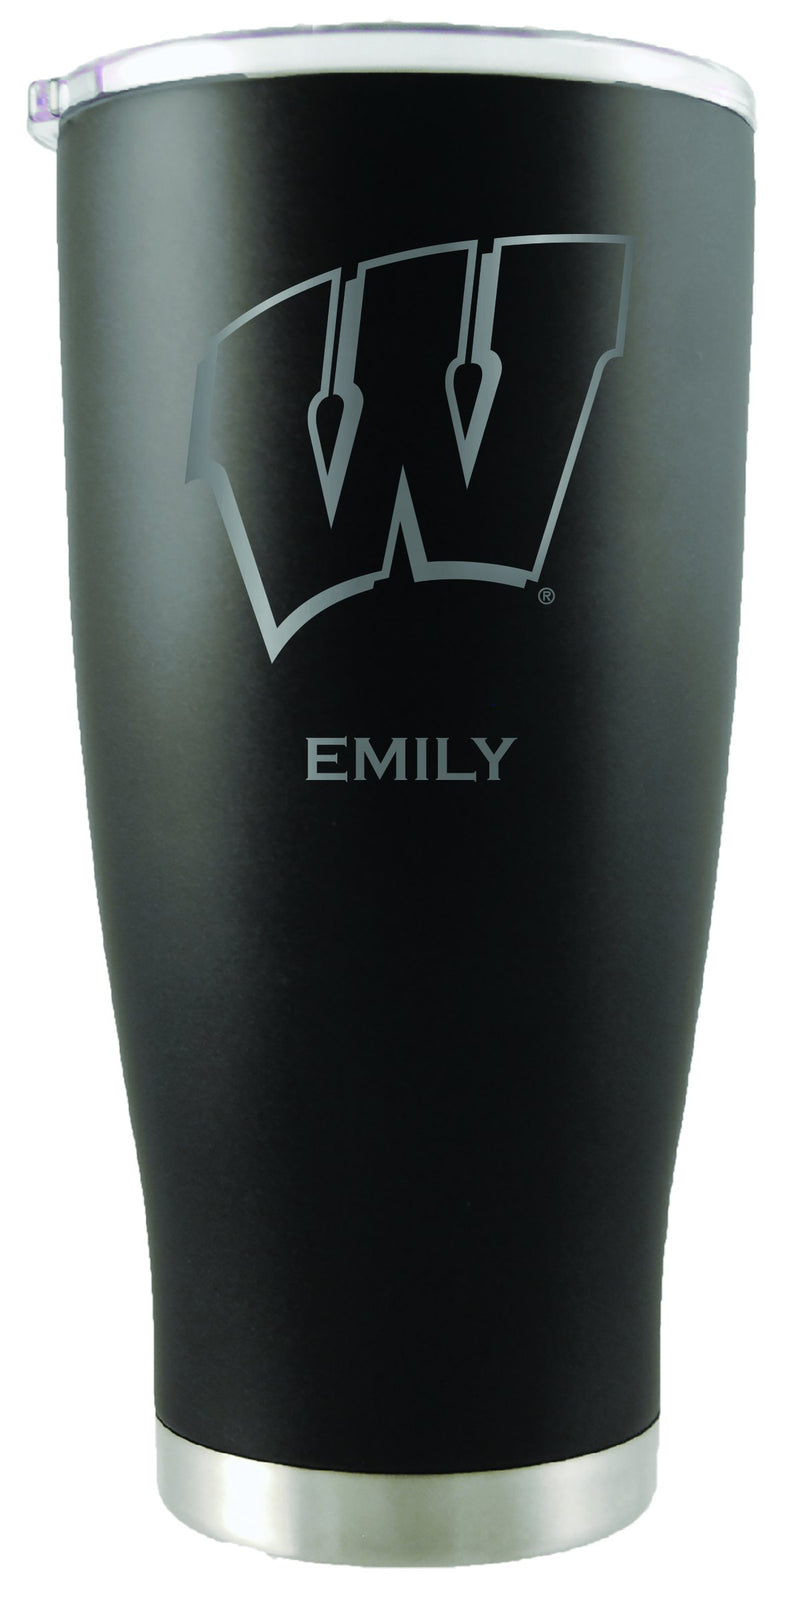 20oz Black Personalized Stainless Steel Tumbler | Wisconsin Badgers
COL, CurrentProduct, Drinkware_category_All, Personalized_Personalized, WIS, Wisconsin Badgers
The Memory Company